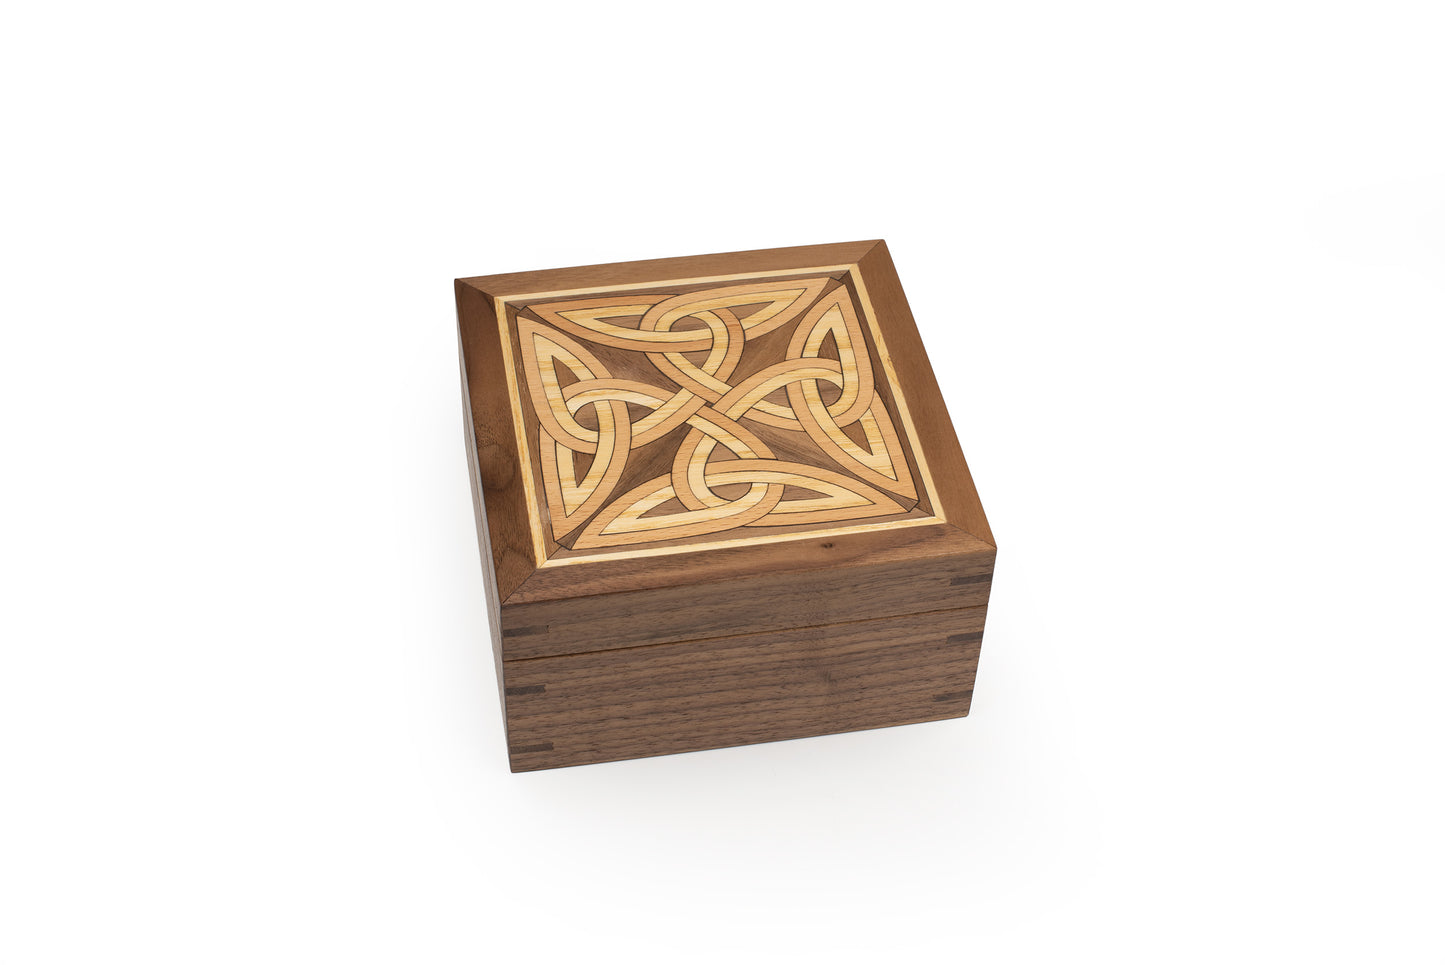 Keepsake Box, Handcrafted of Solid Walnut with Celtic Strathmartin Marquetry inlays, optional Personalised engraving